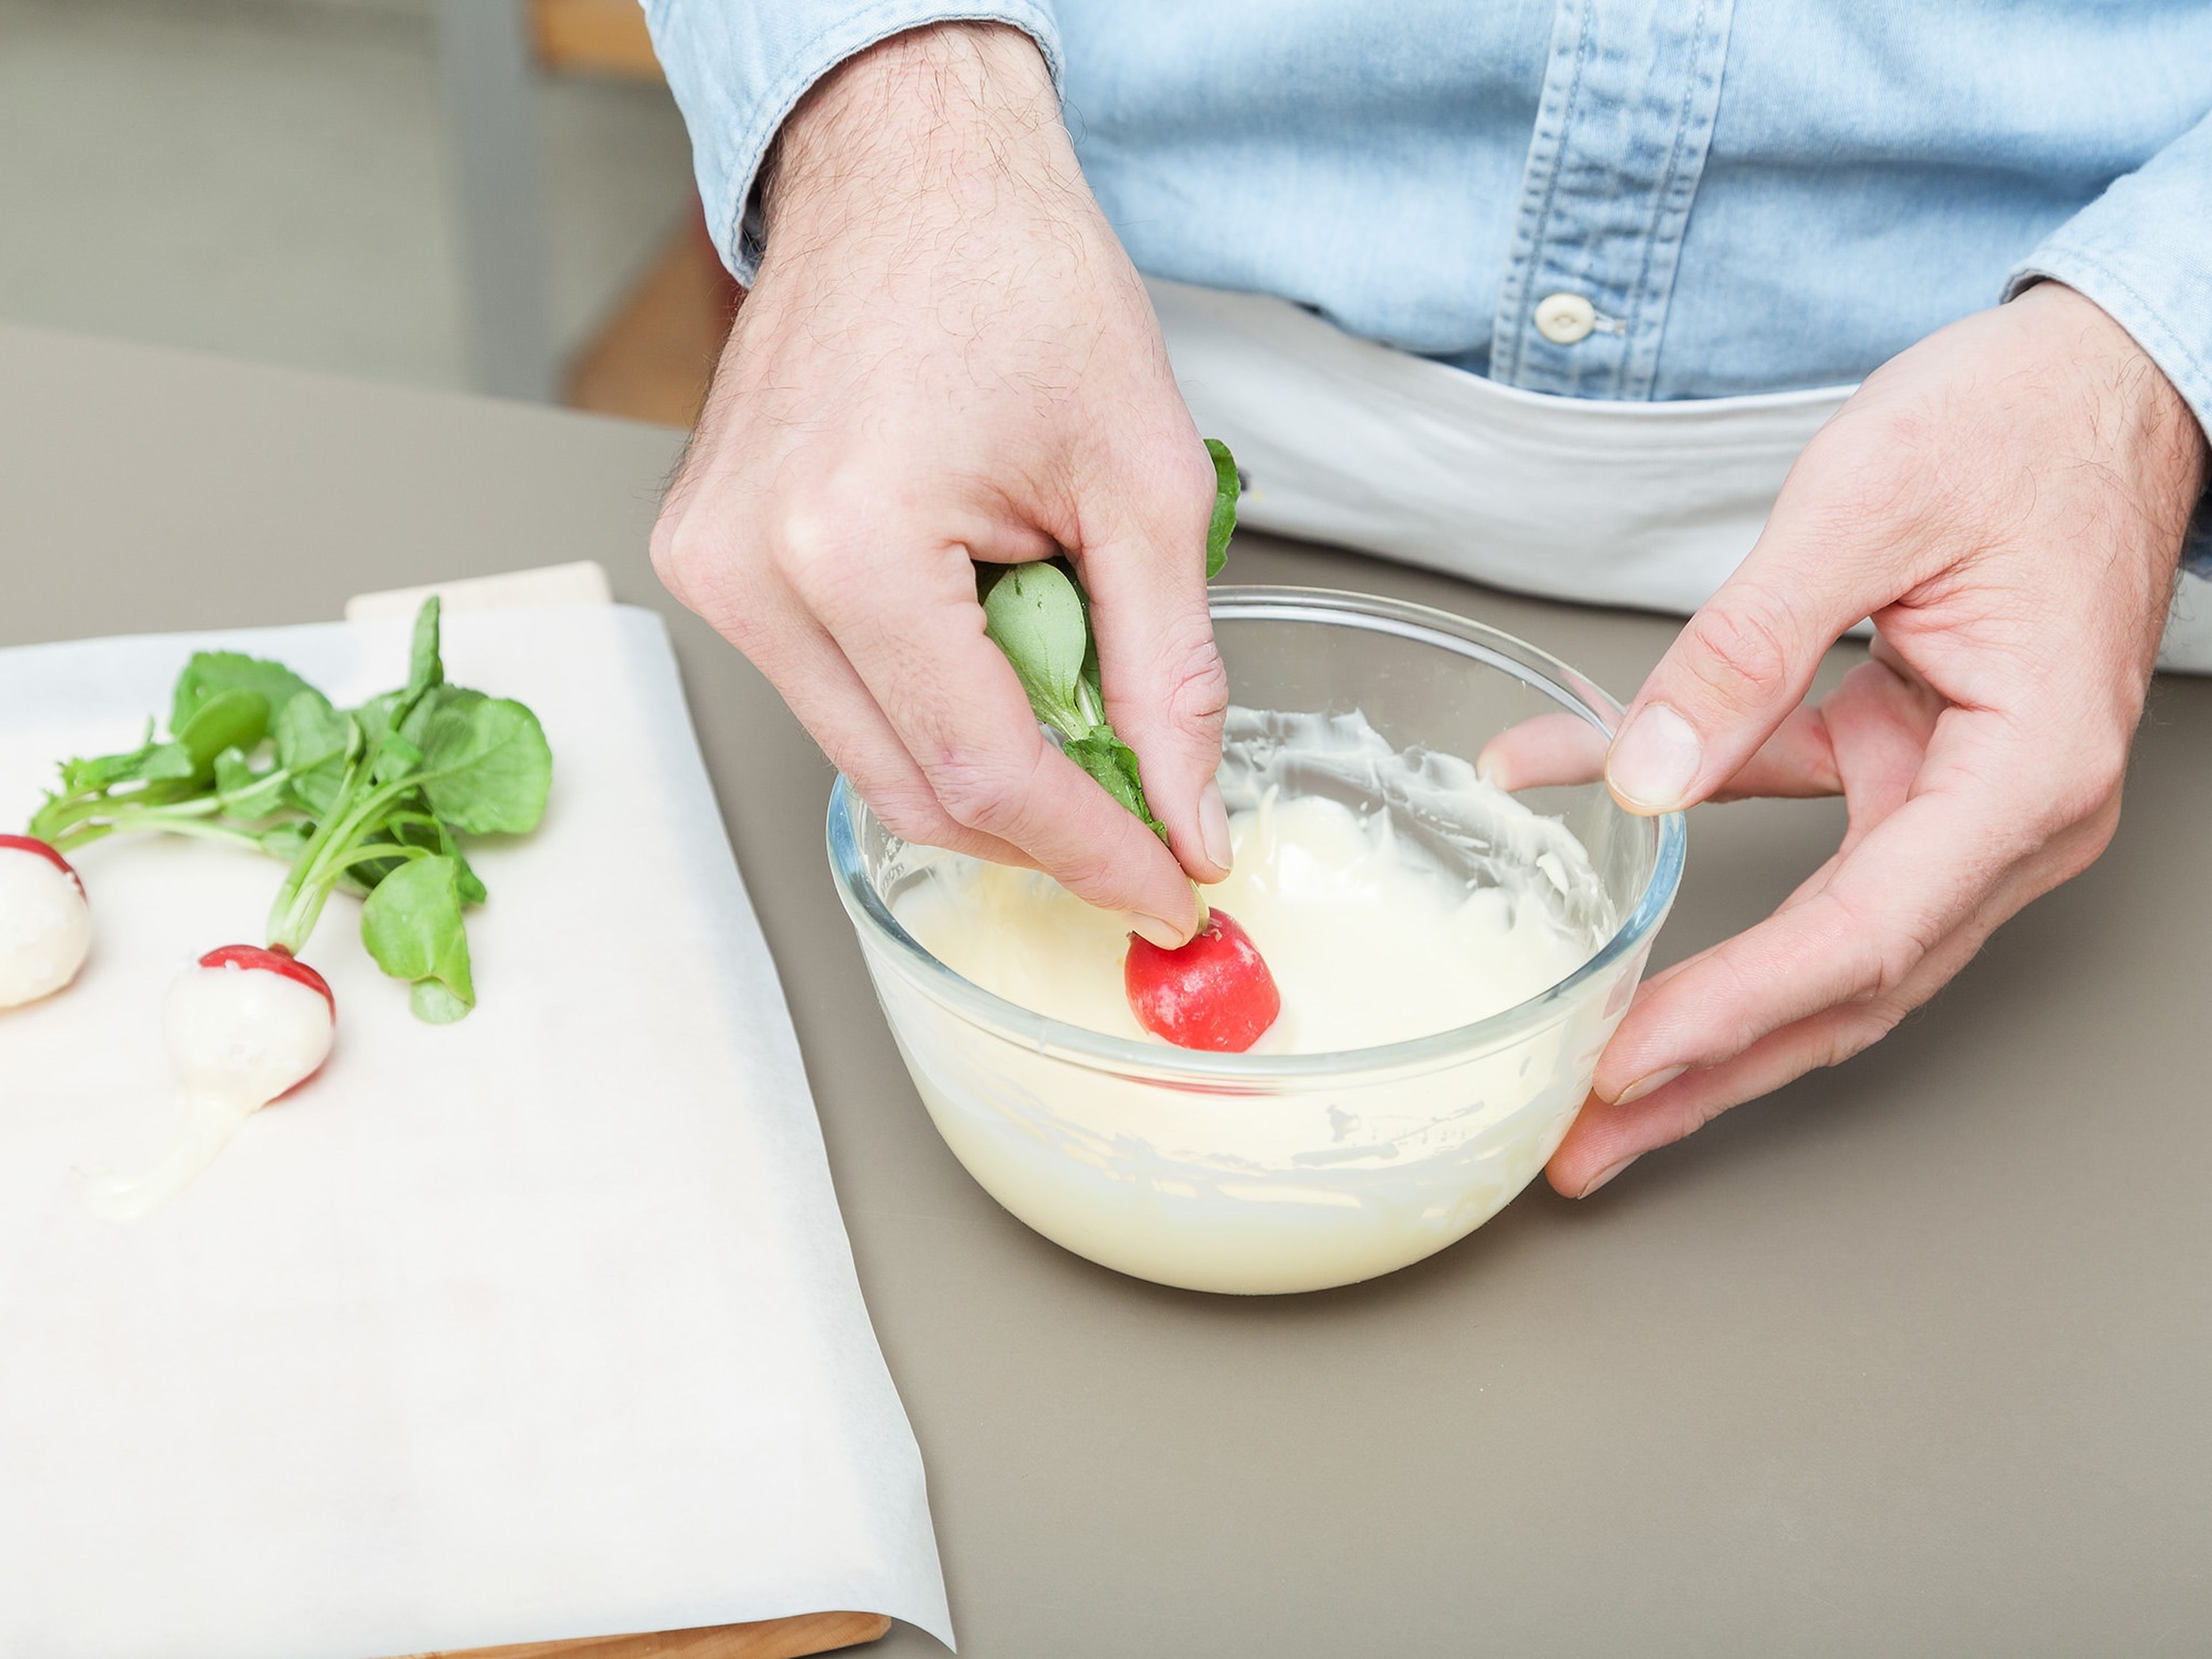 Dip the radishes halfway in the butter once, then again, and gently shake off any excess. Sprinkle some flaky sea salt over the butter dipped radish and set on a parchment lined plate. Refrigerate until butter is set, approx. 10 min. Serve immediately and enjoy!